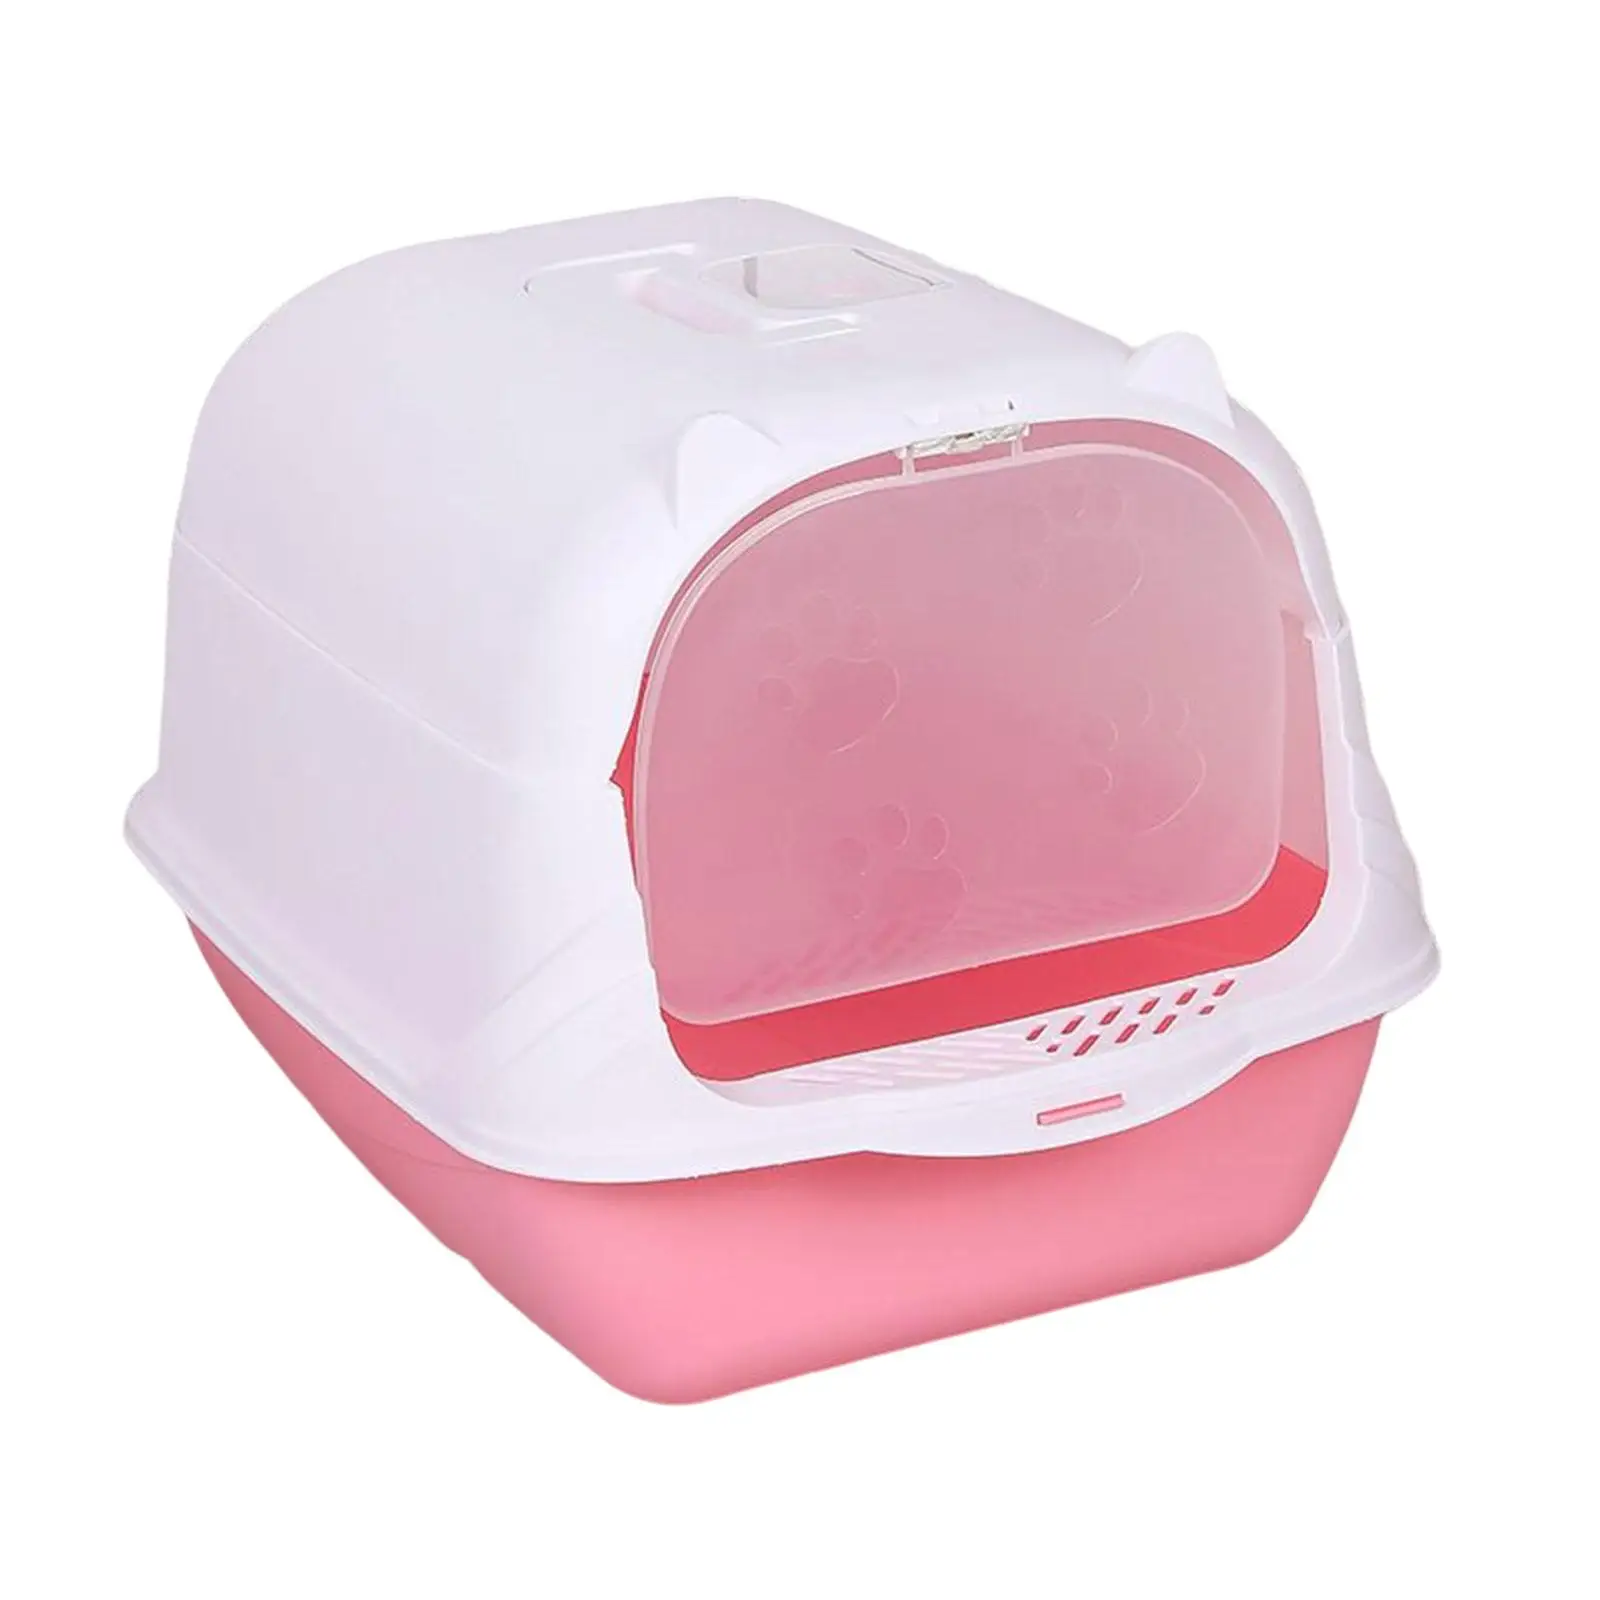 High-sided Hooded Litter Box, Closed Potty, Commode Litter Box, Bedpan, Deep